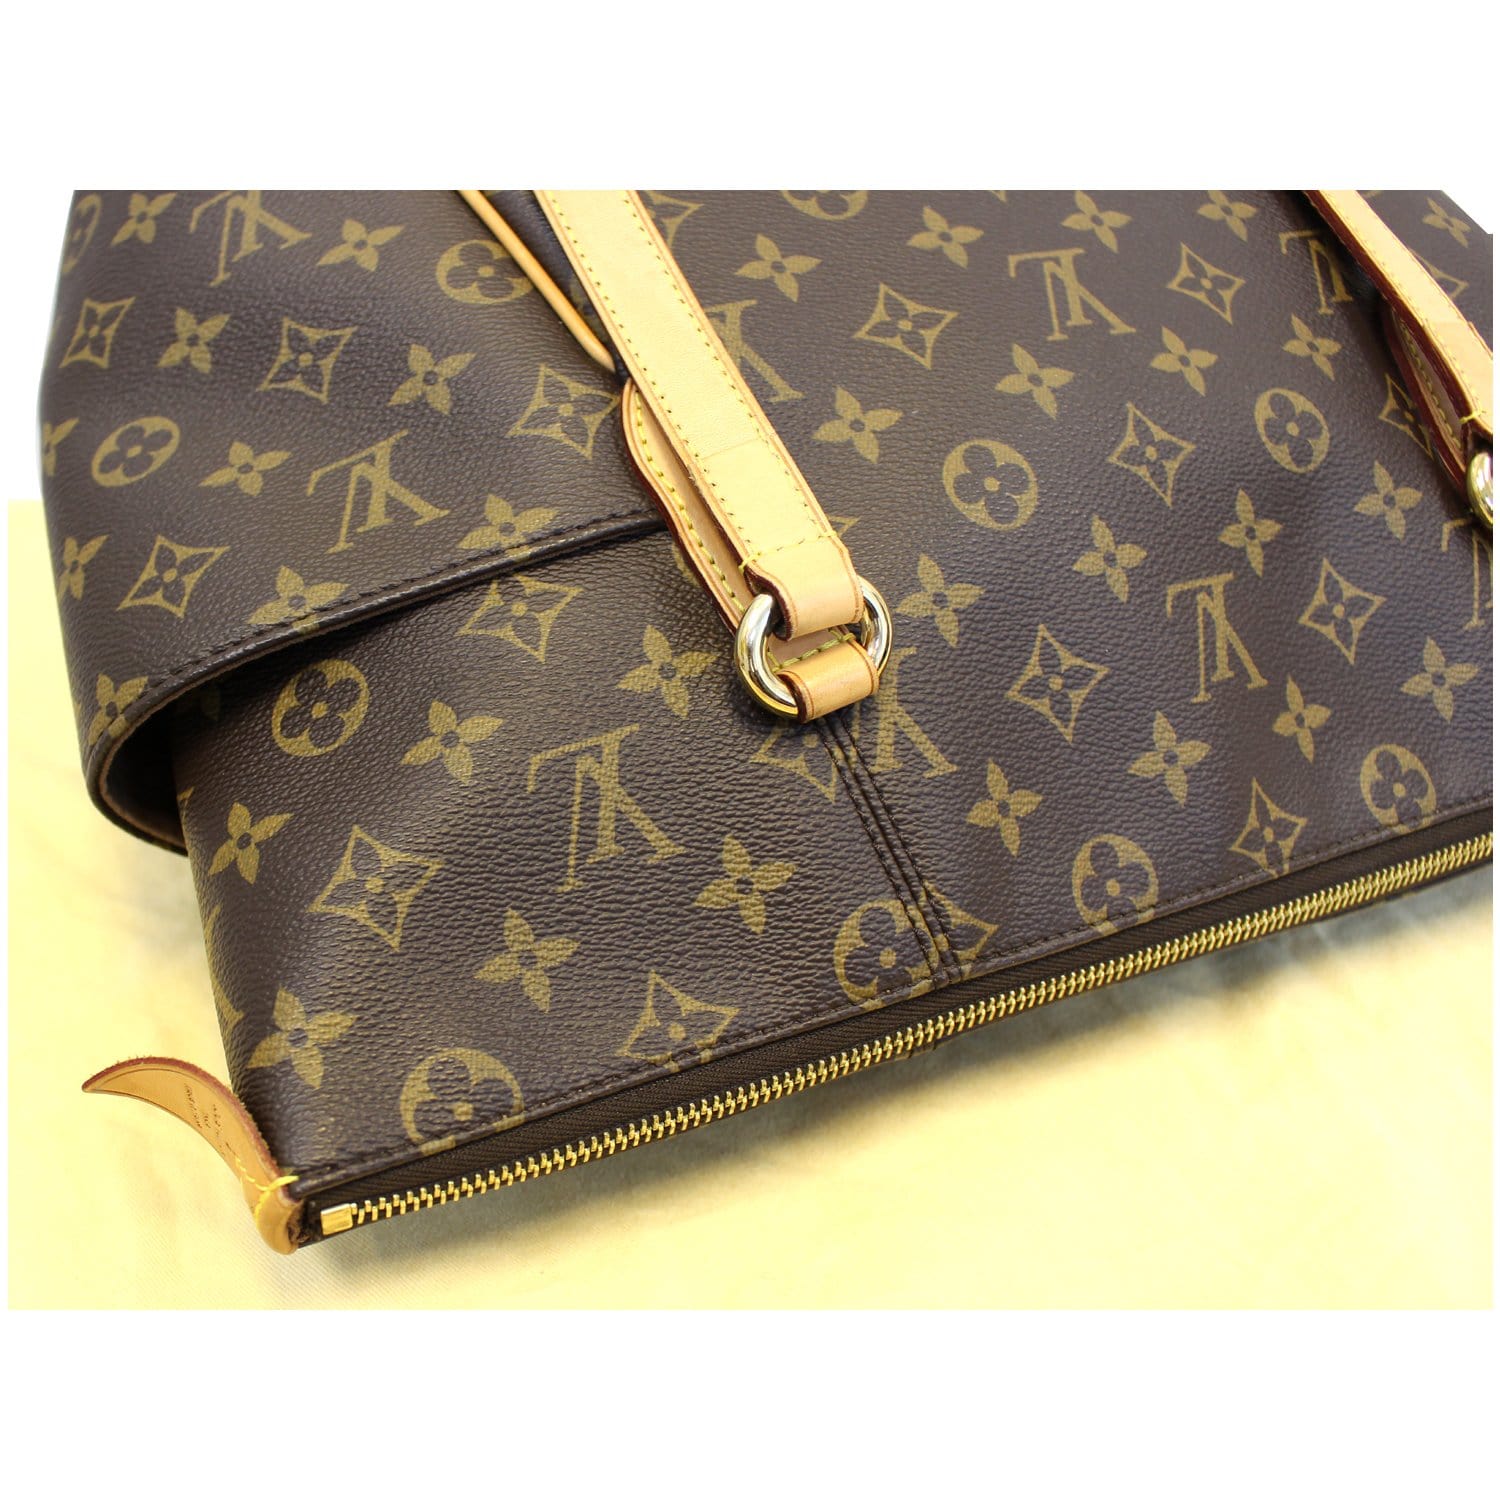 Totally GM Top handle bag in Monogram Coated Canvas, Gold Hardware